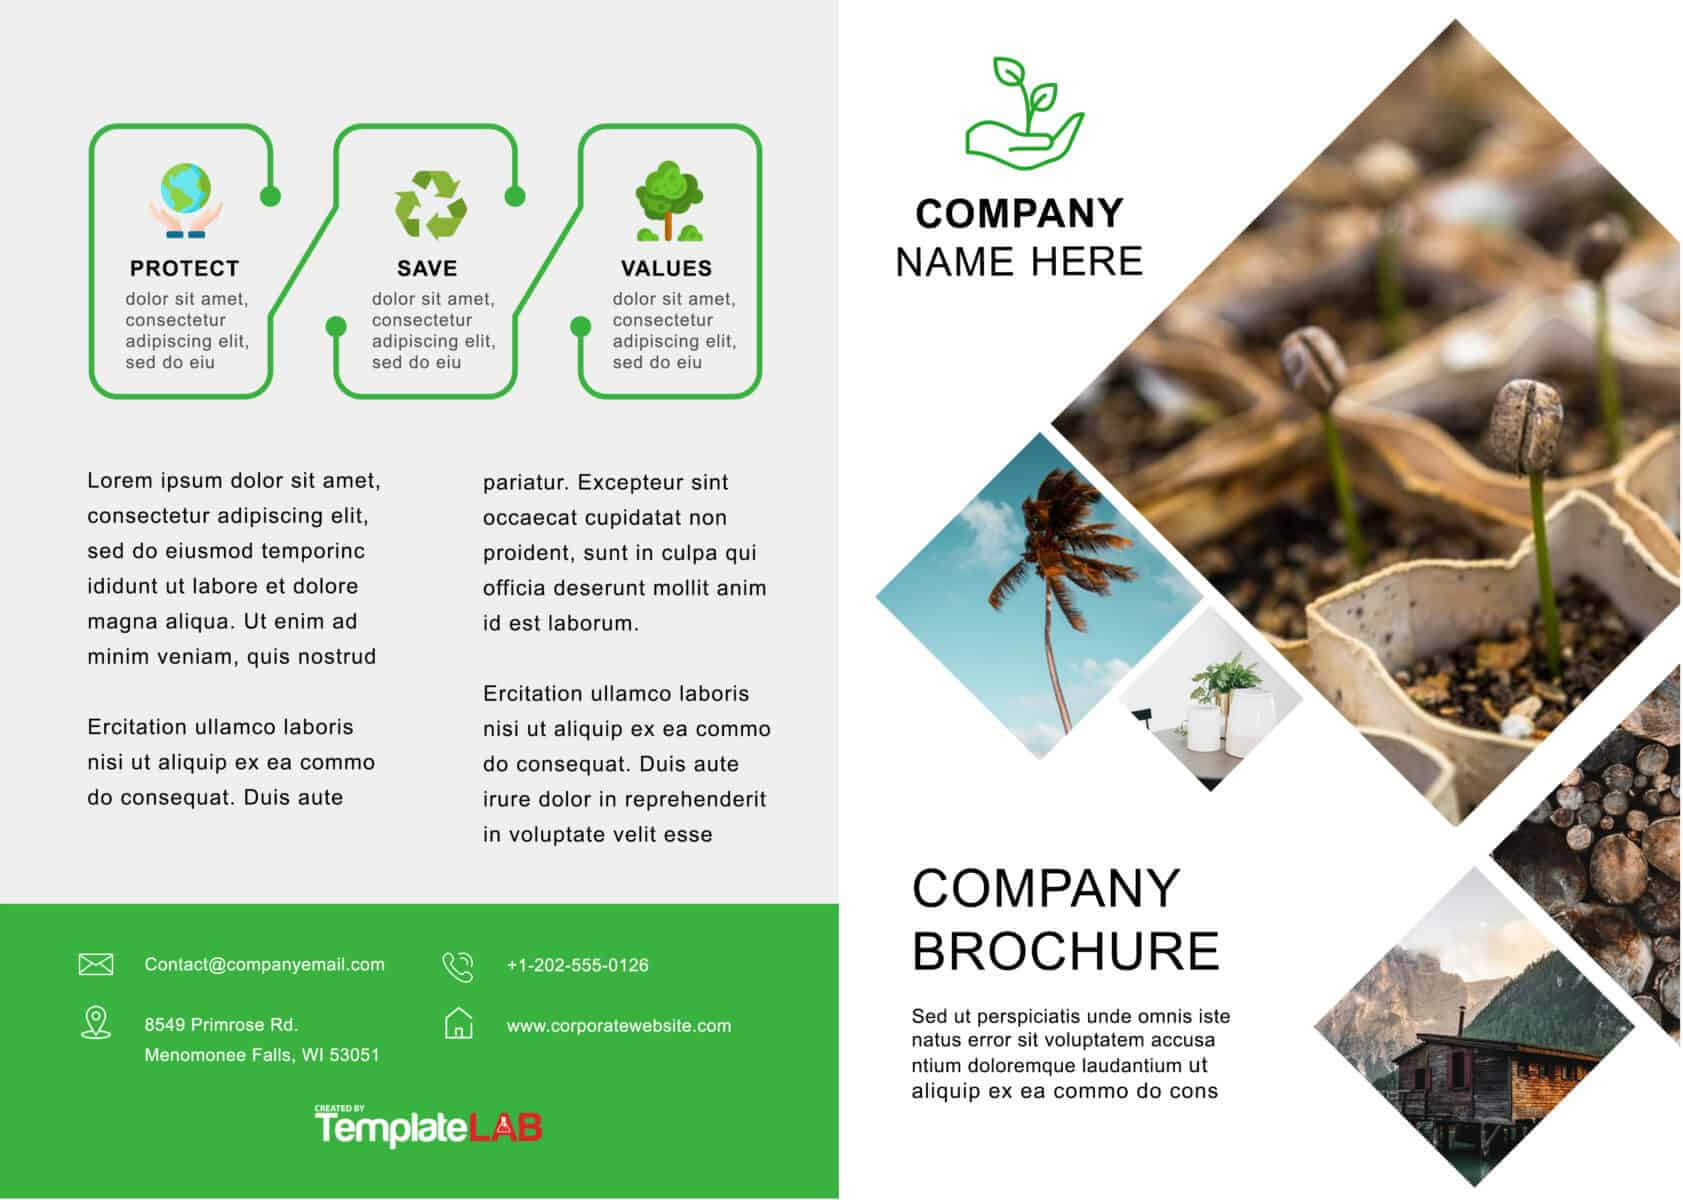 33 Free Brochure Templates (Word + Pdf) ᐅ Template Lab With Regard To Word 2013 Brochure Template